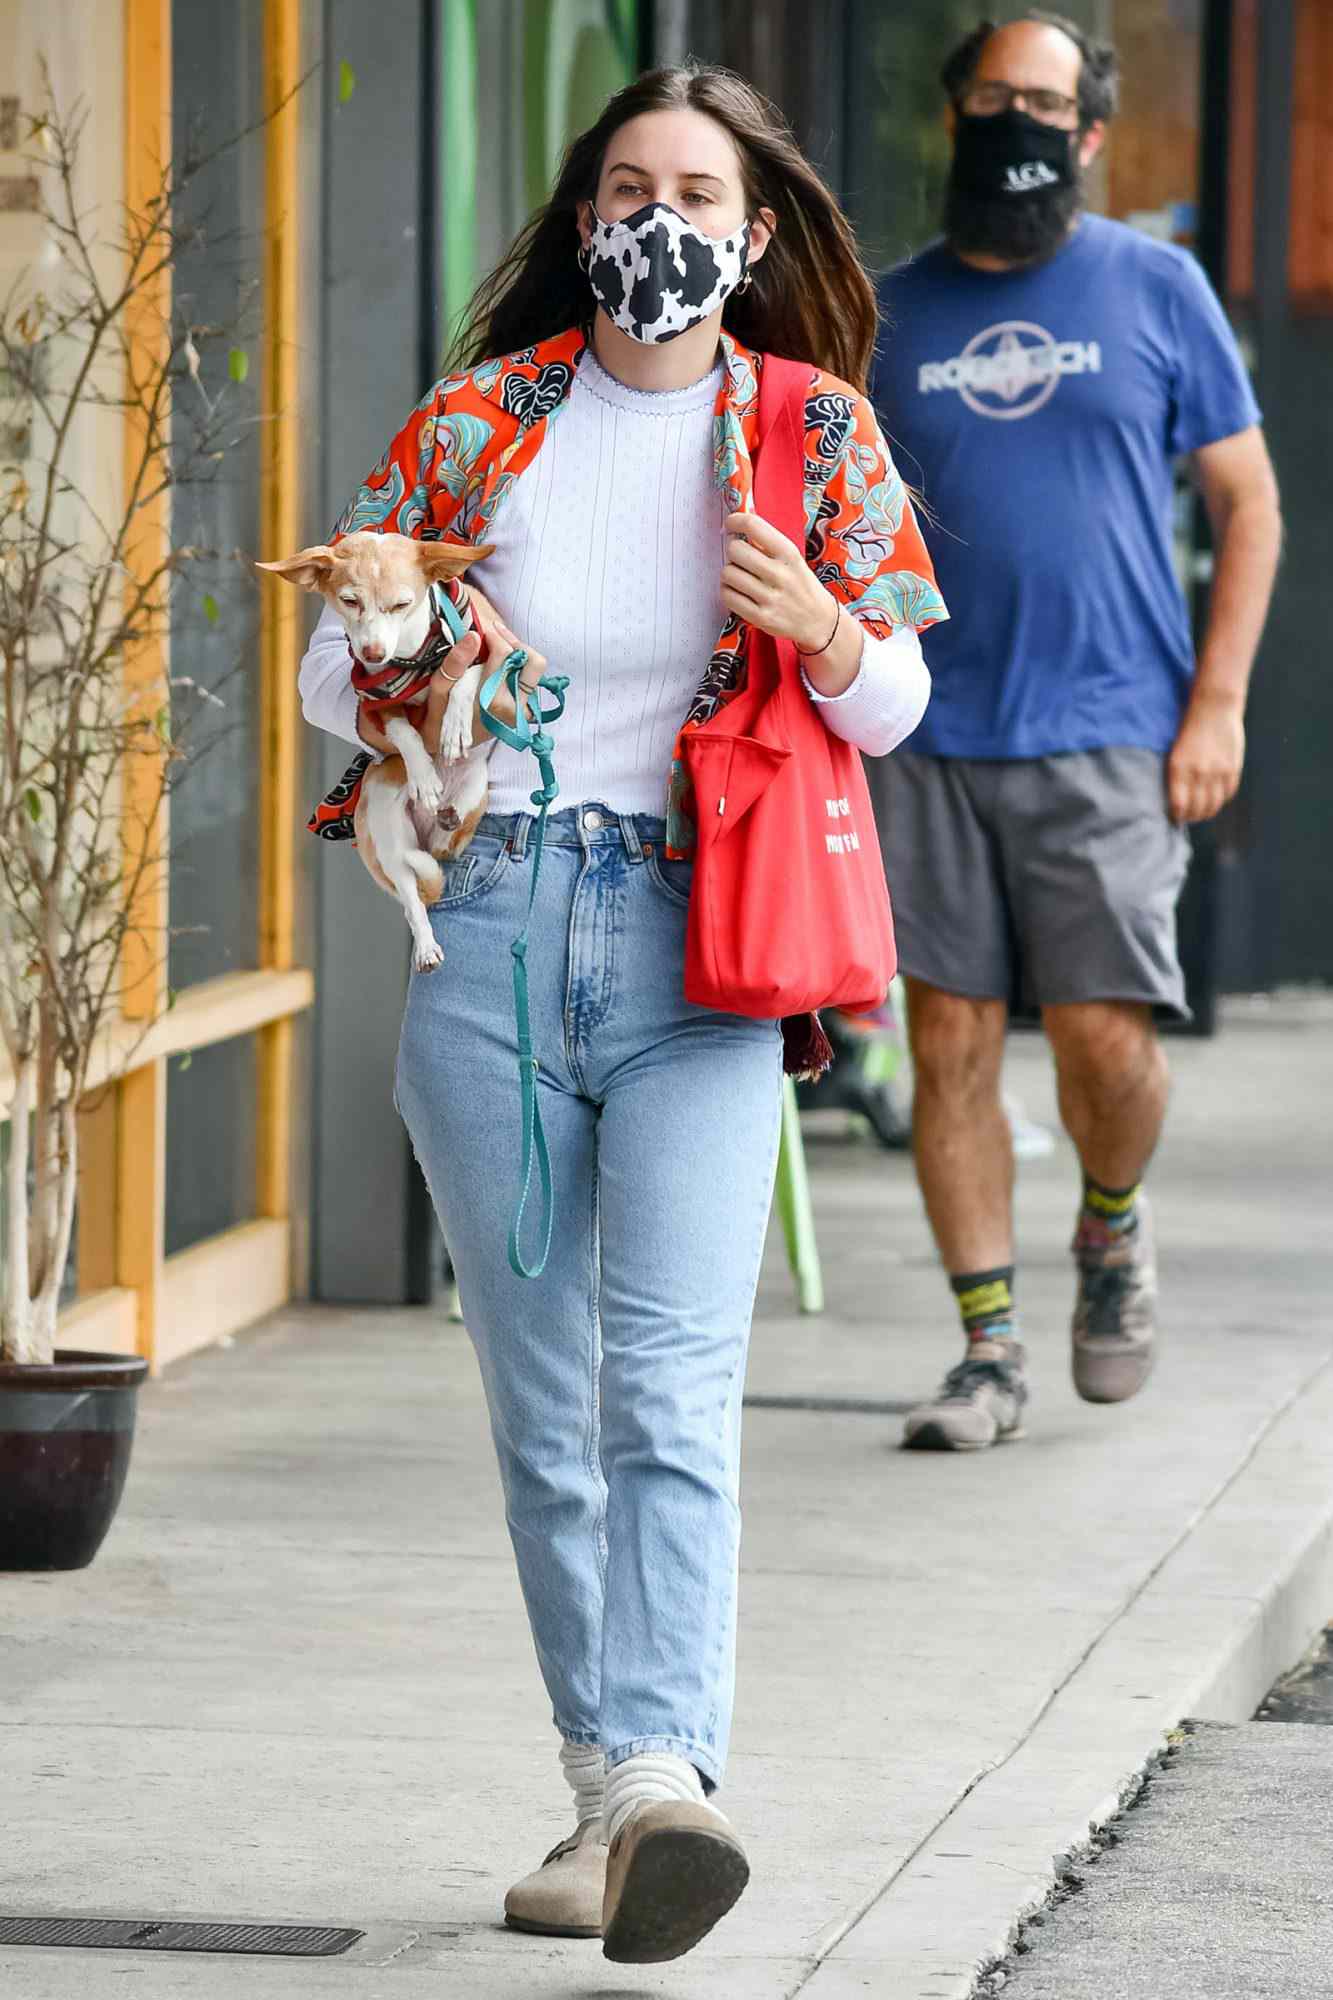 Scout Willis is seen on July 22, 2020 in Los Angeles, California